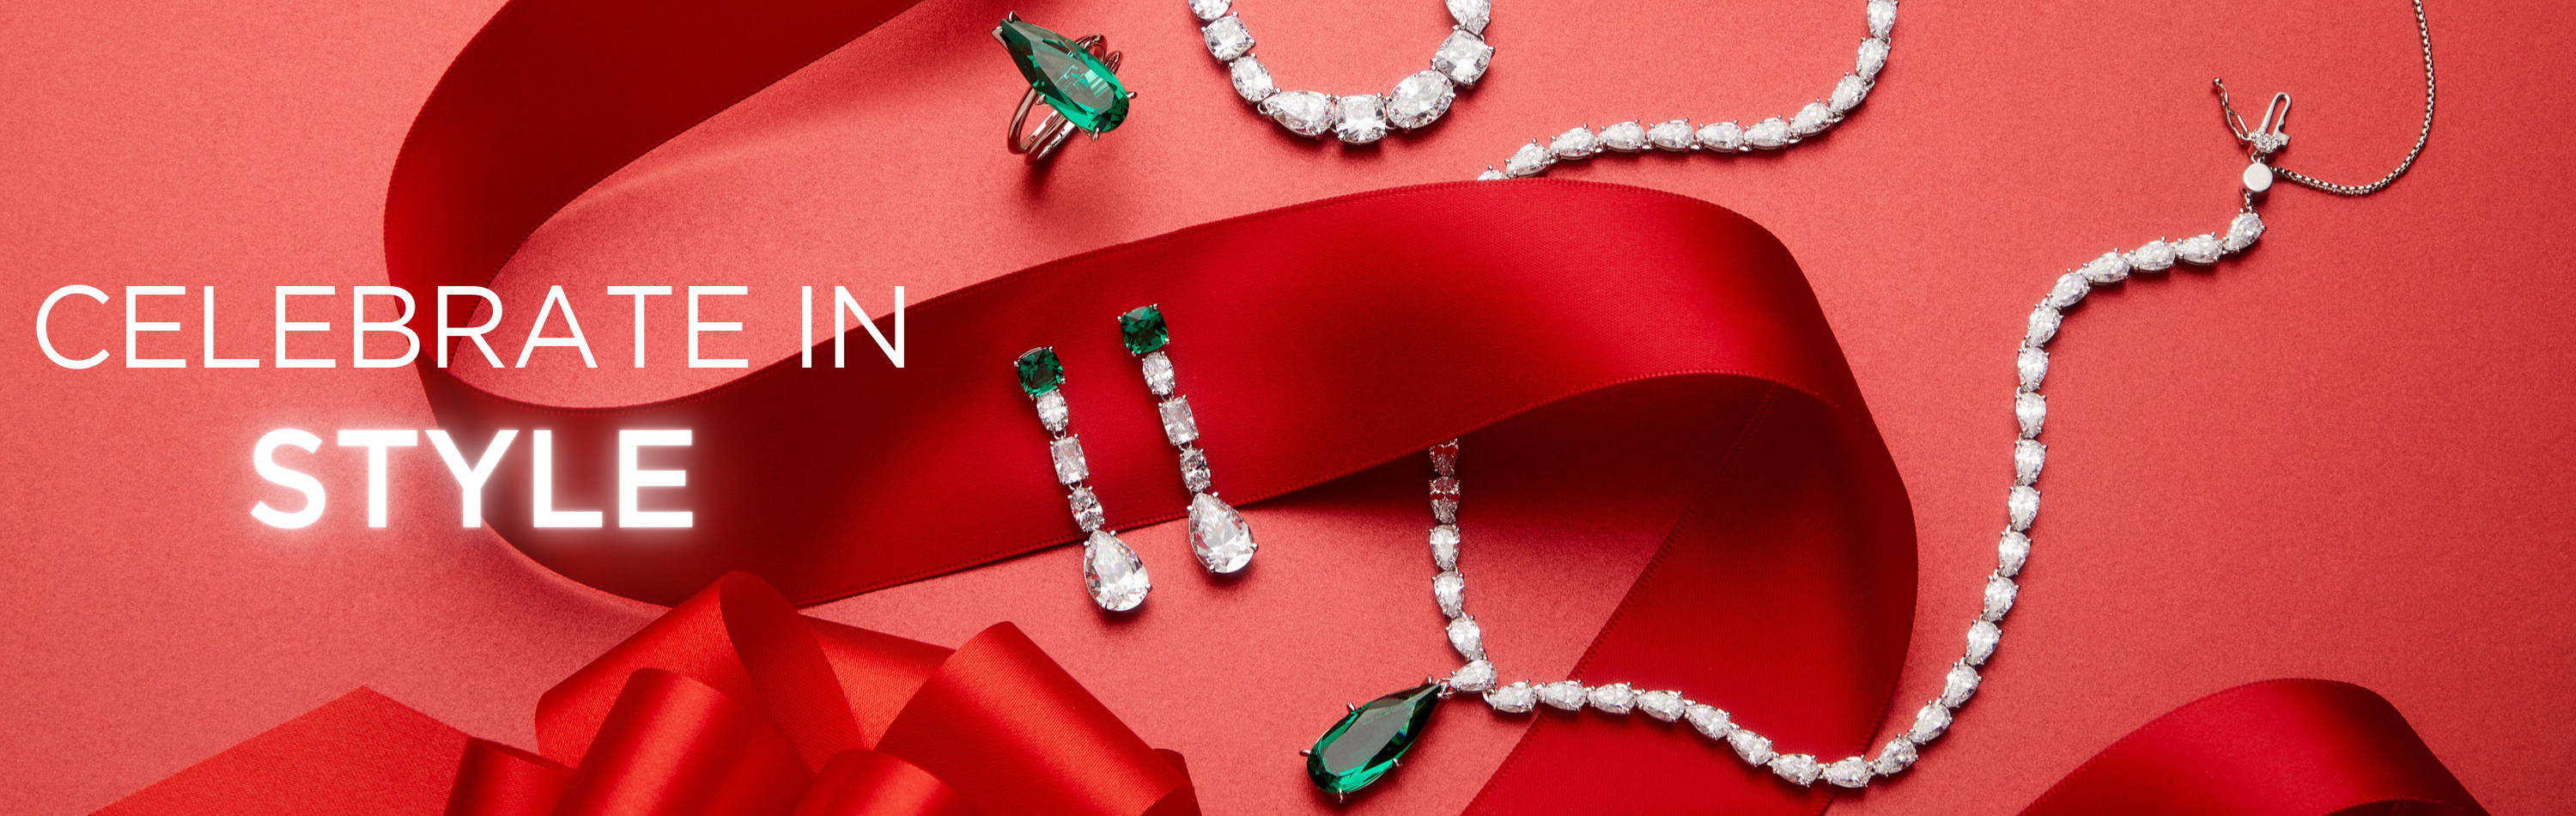 Celebrate in style. Image of cubic zirconia and emerald green colored necklace, earrings, and ring on red wrapping paper and red bow. 